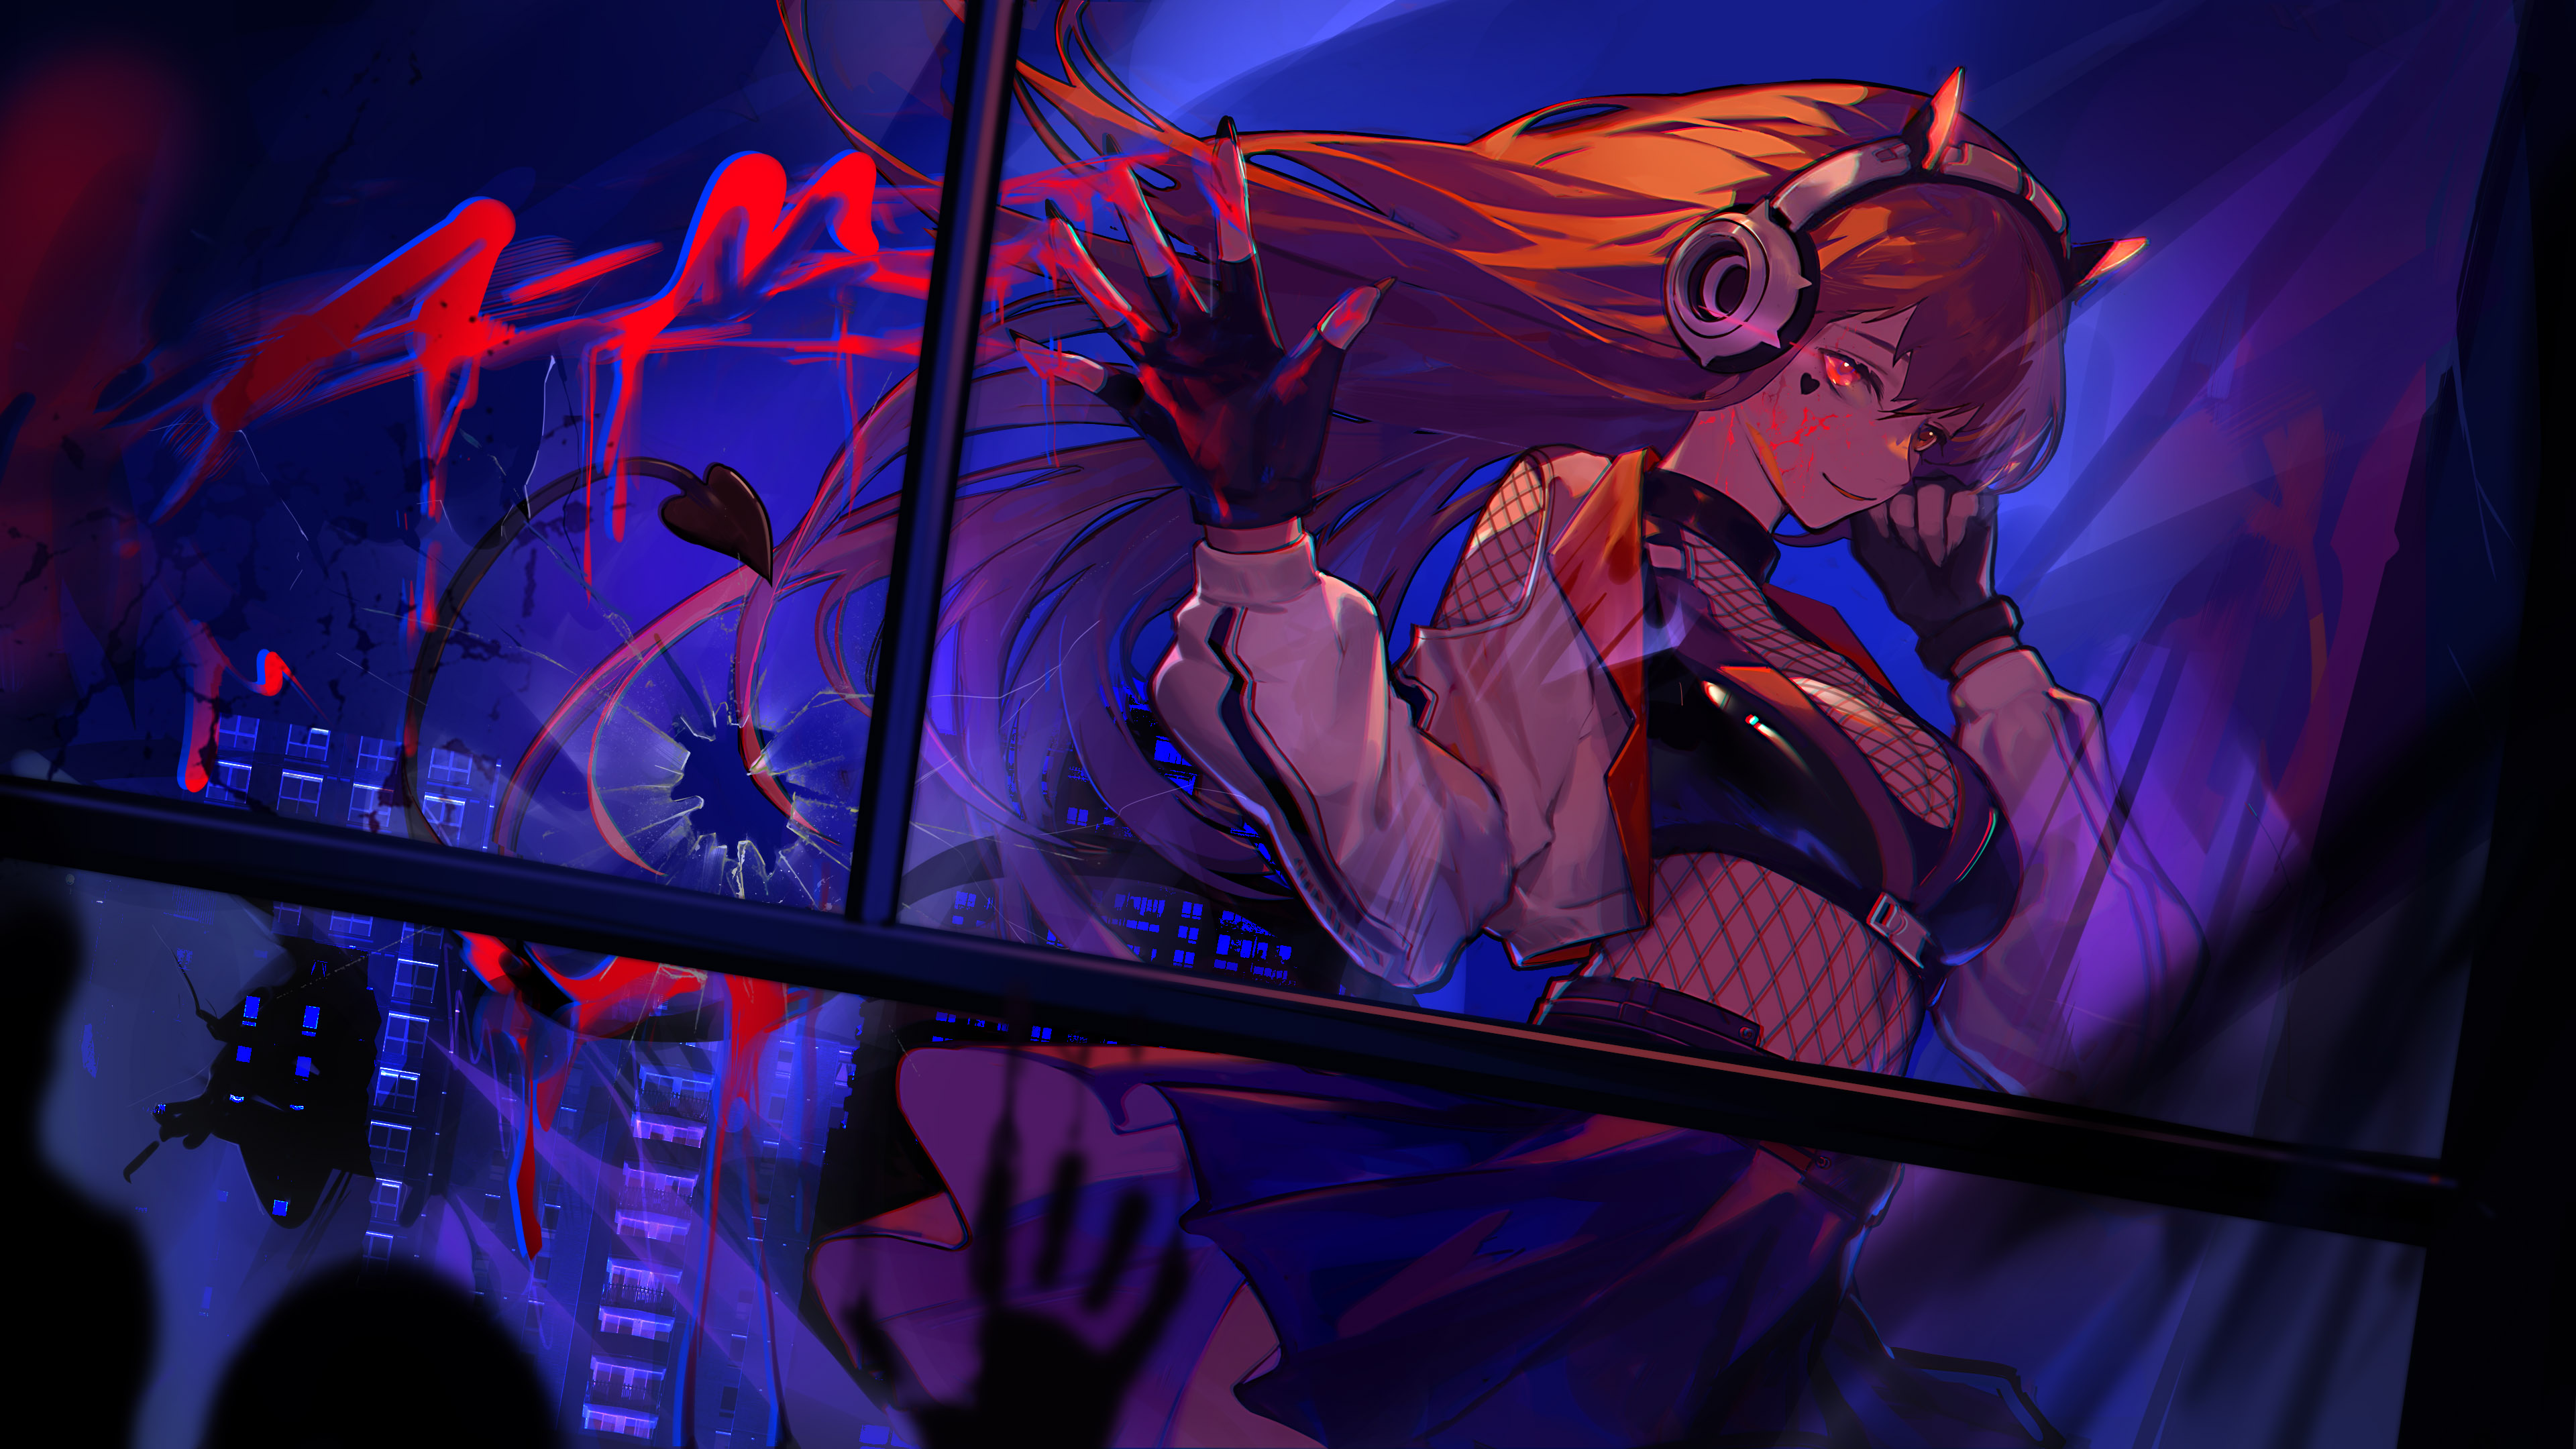 Anime 3840x2160 Mirror 2: Project X headphones night hair blowing in the wind broken glass city